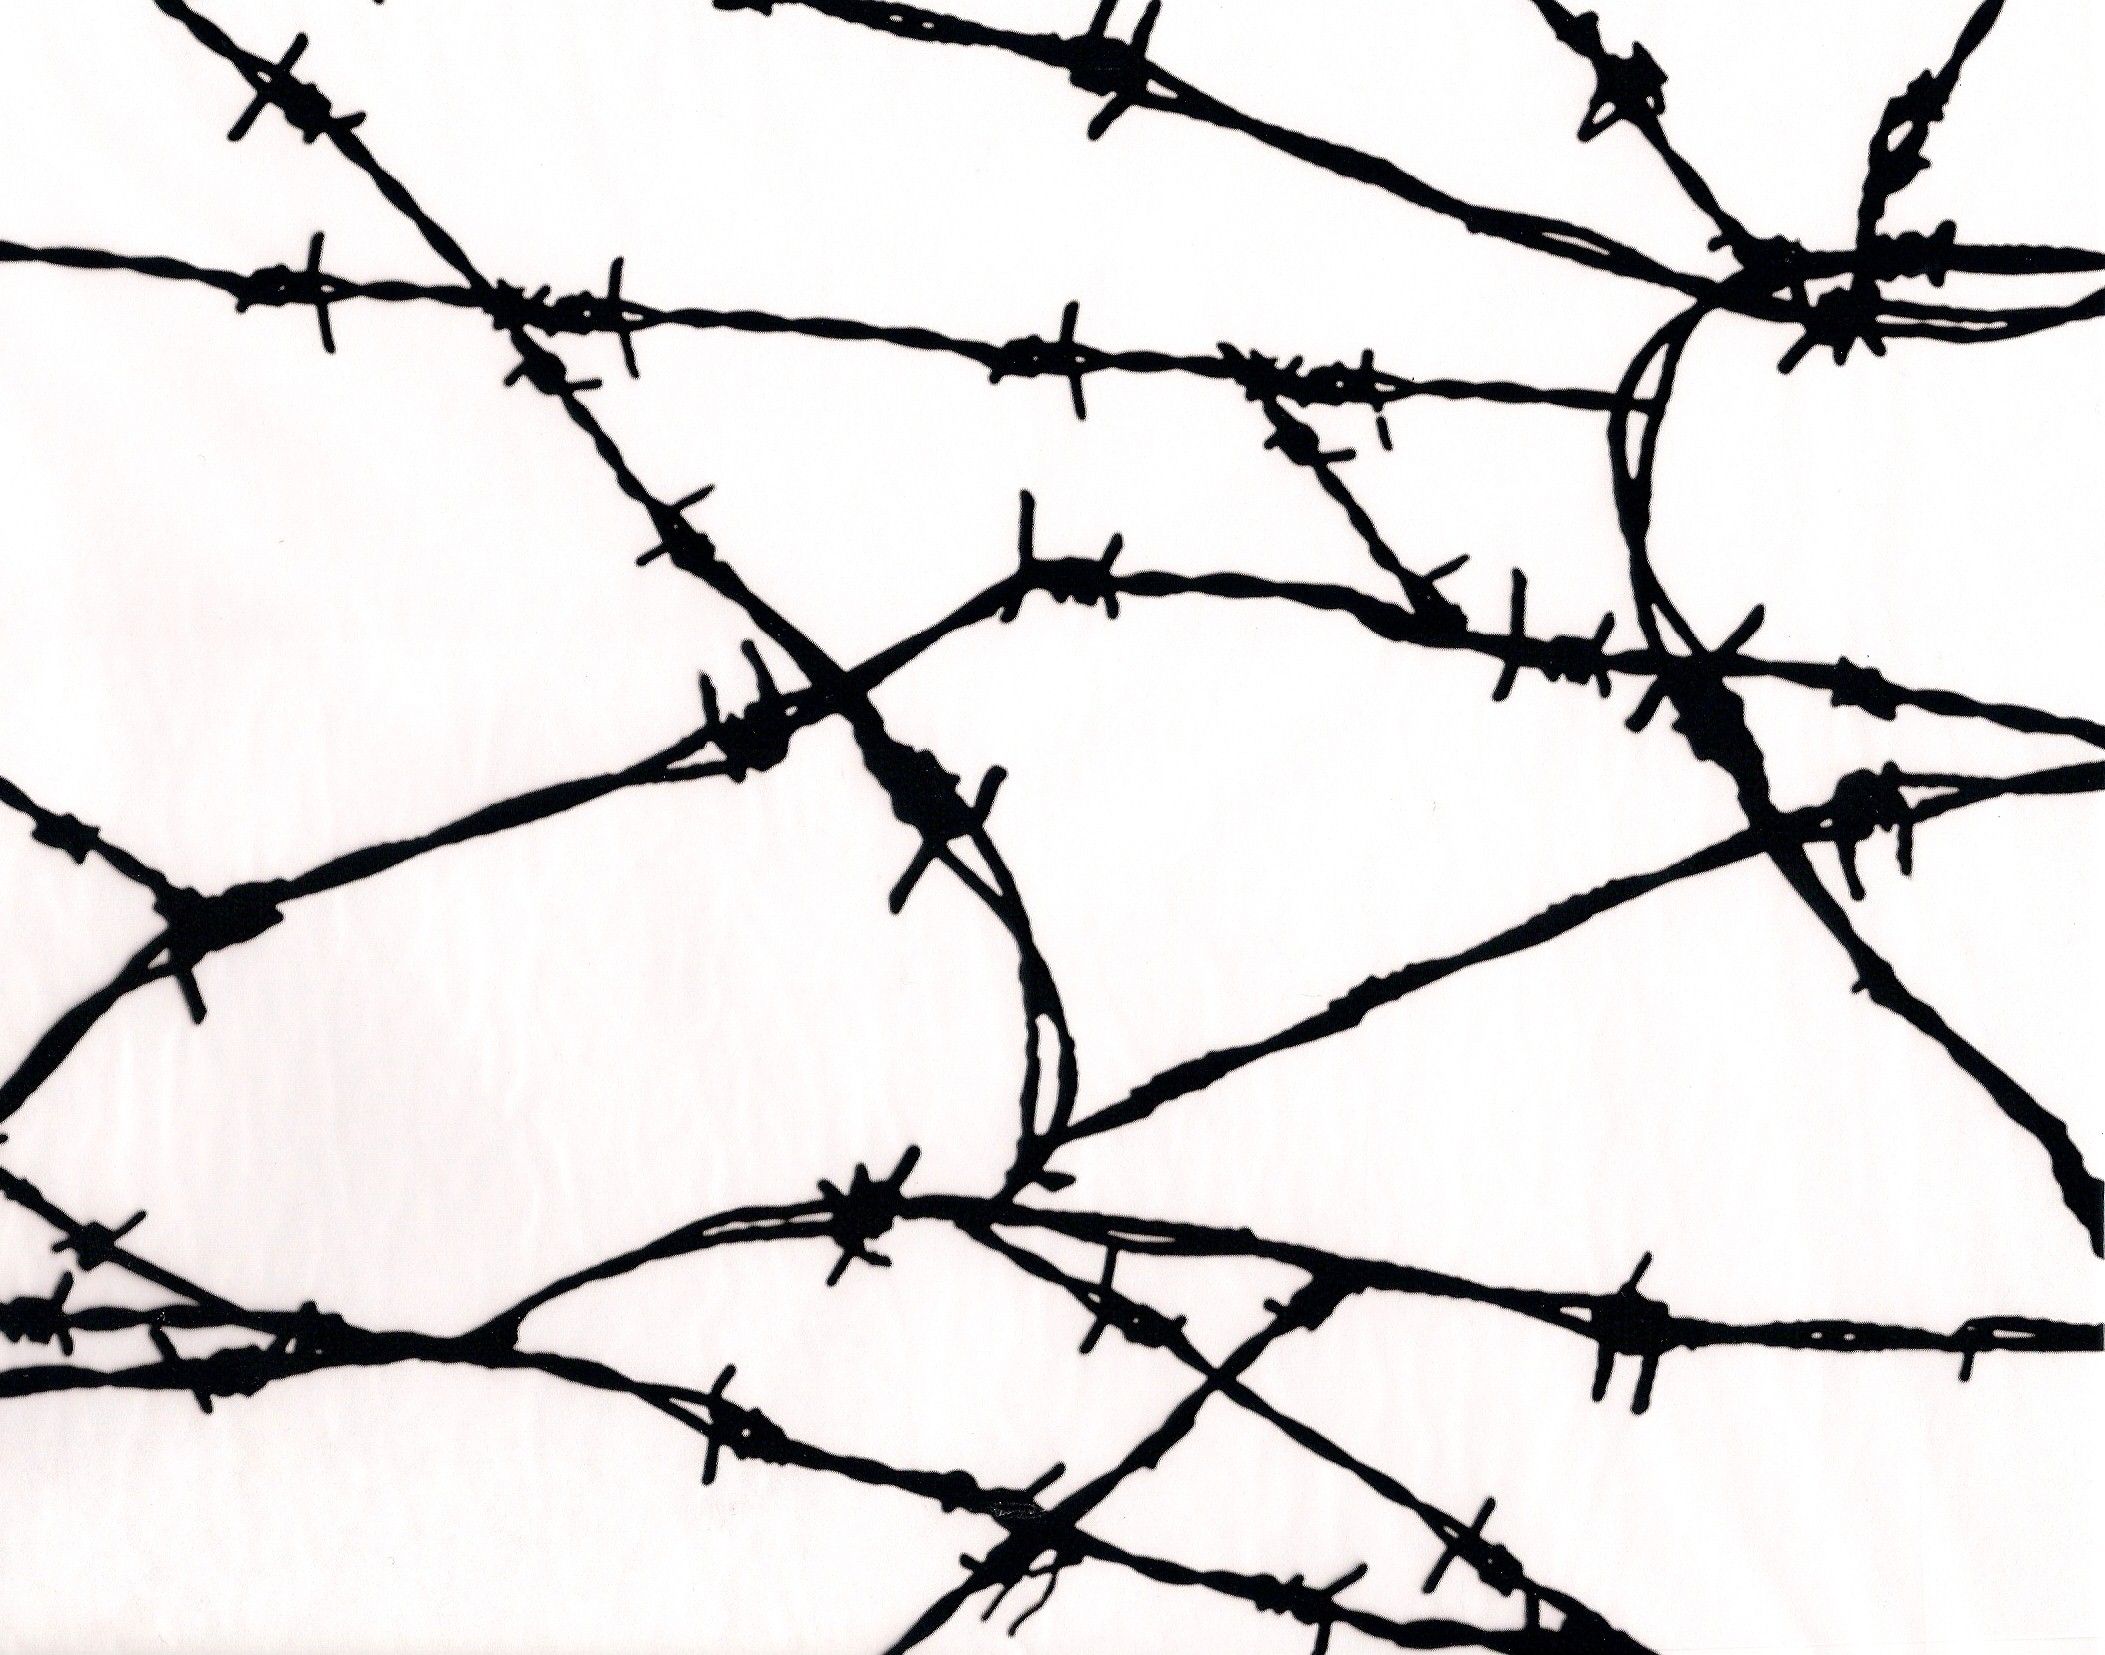 Closeup Black Barb Wire Texture Background Vertical Dark Black Barb Fence  Wire Abstract Background Stock Photo Picture And Royalty Free Image Image  152929729